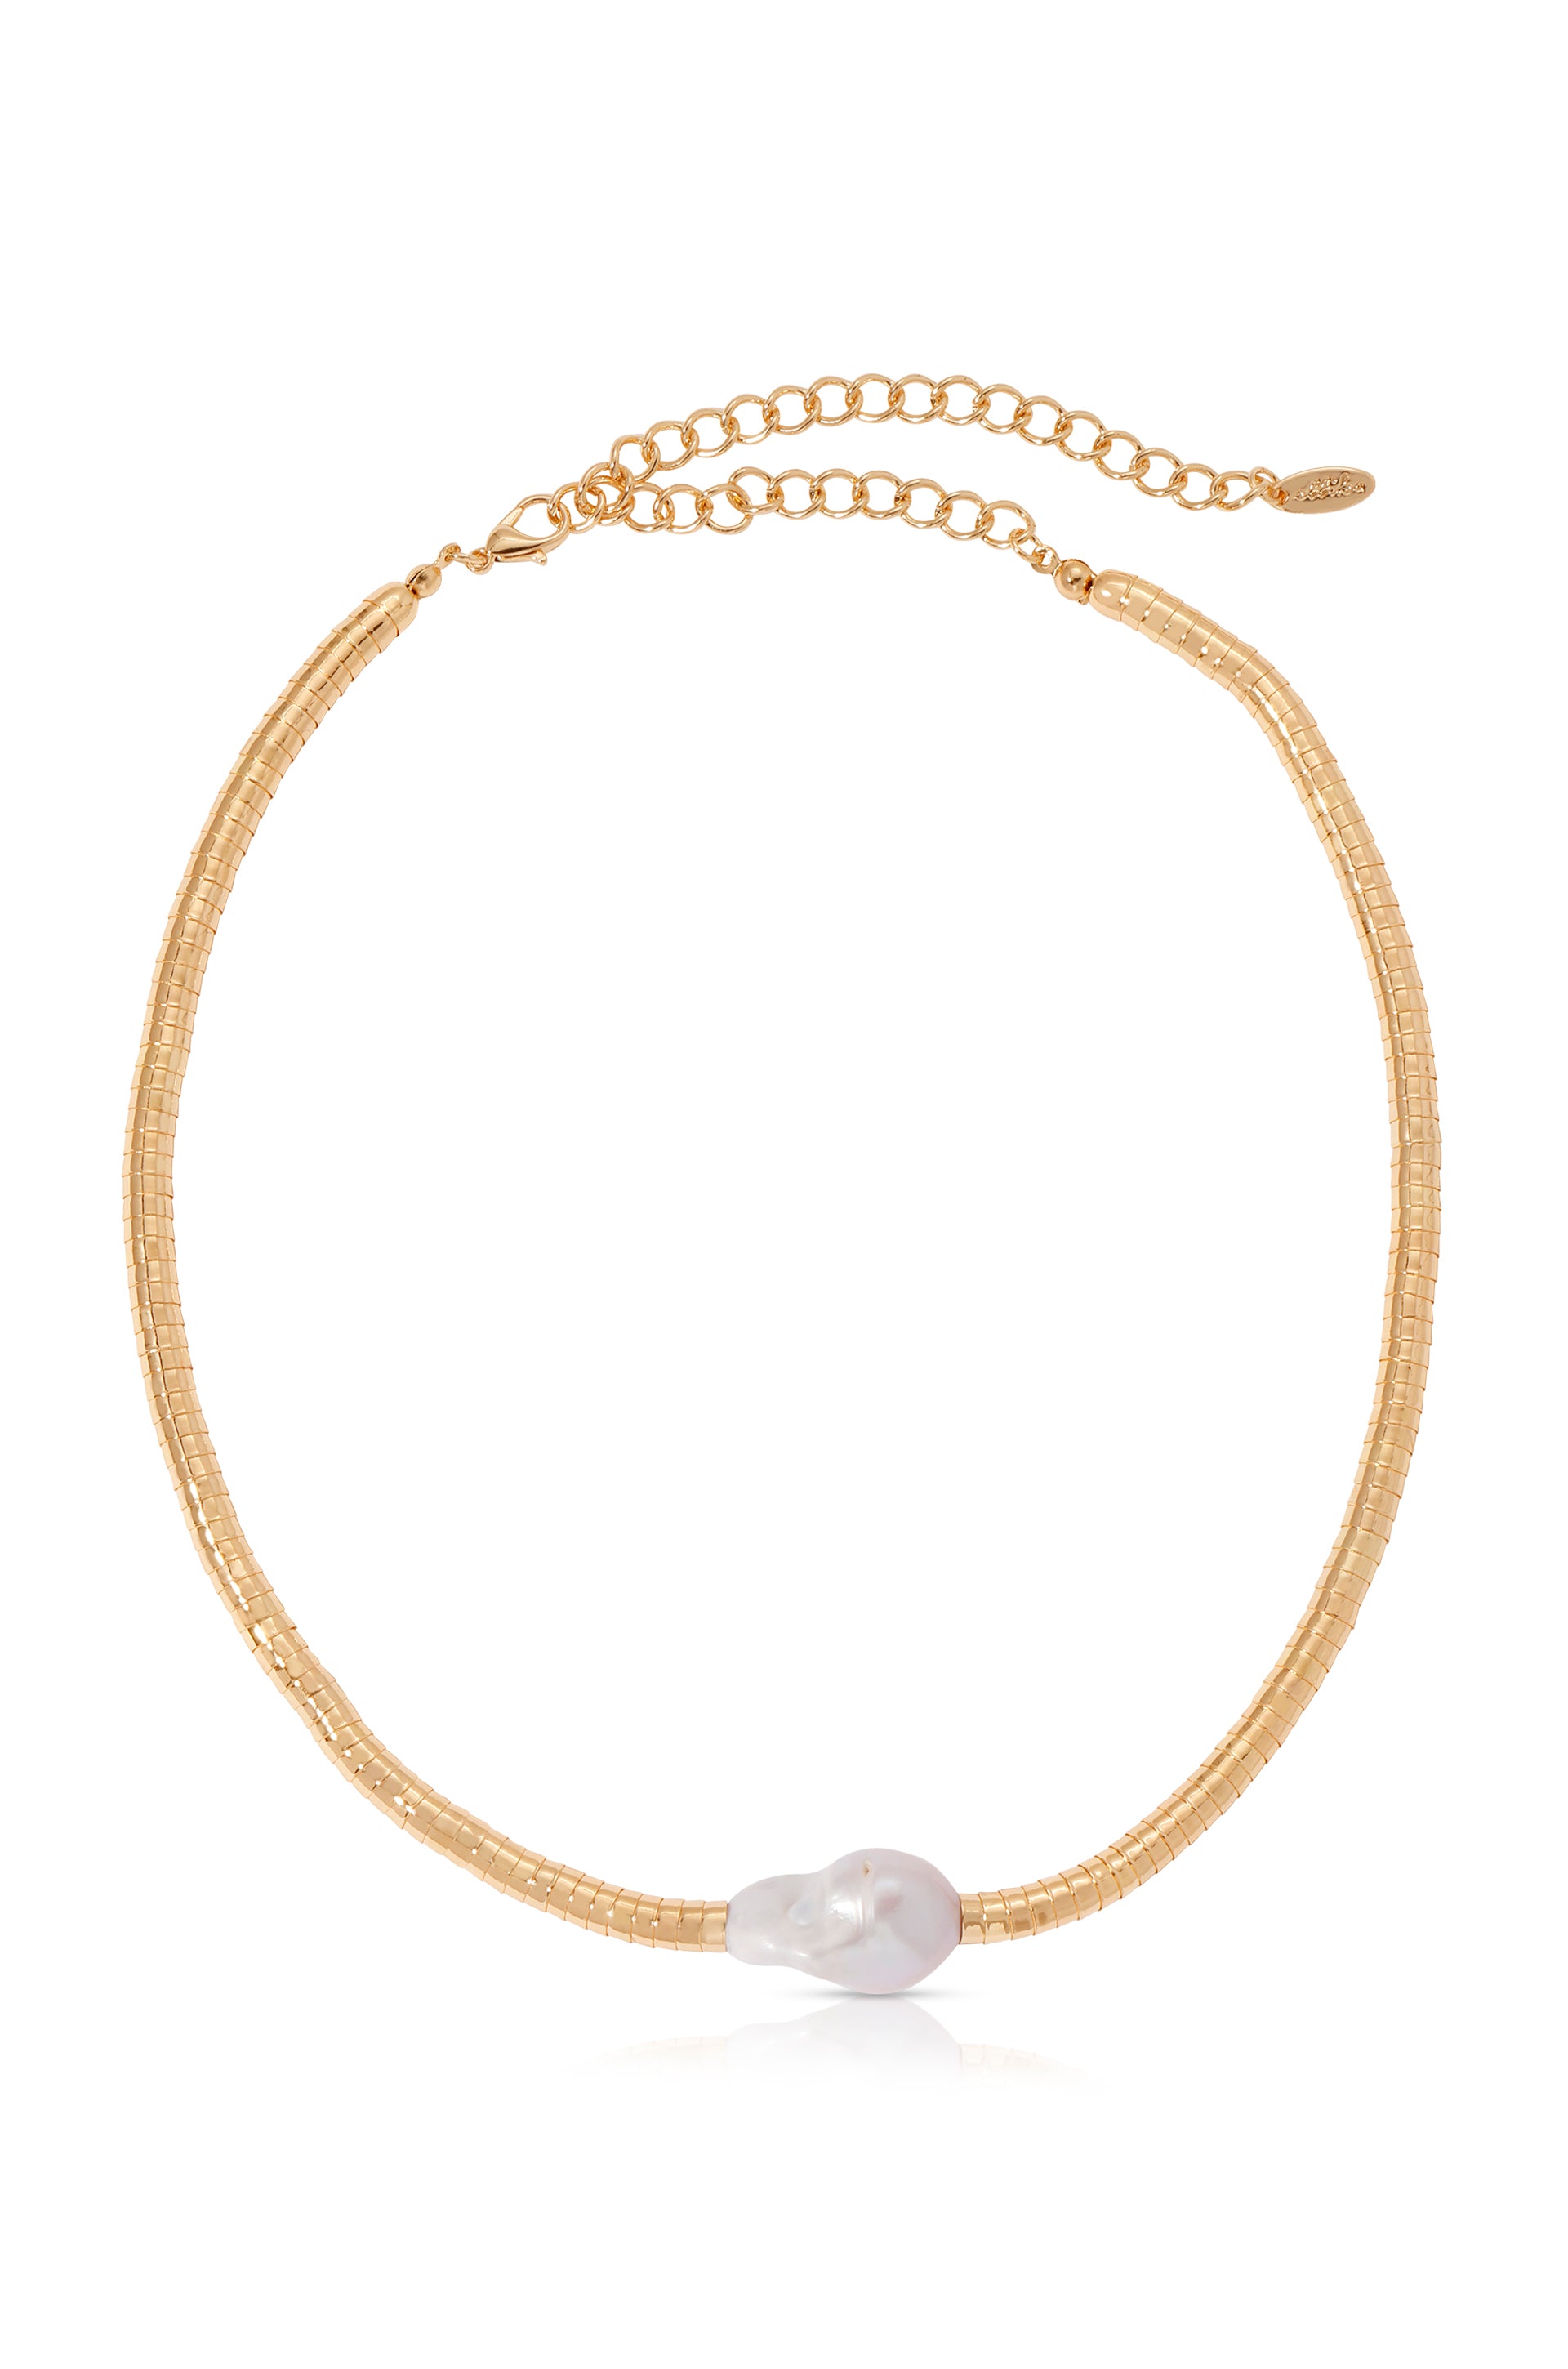 Liquid Gold and Pearl 18k Gold Plated Choker full